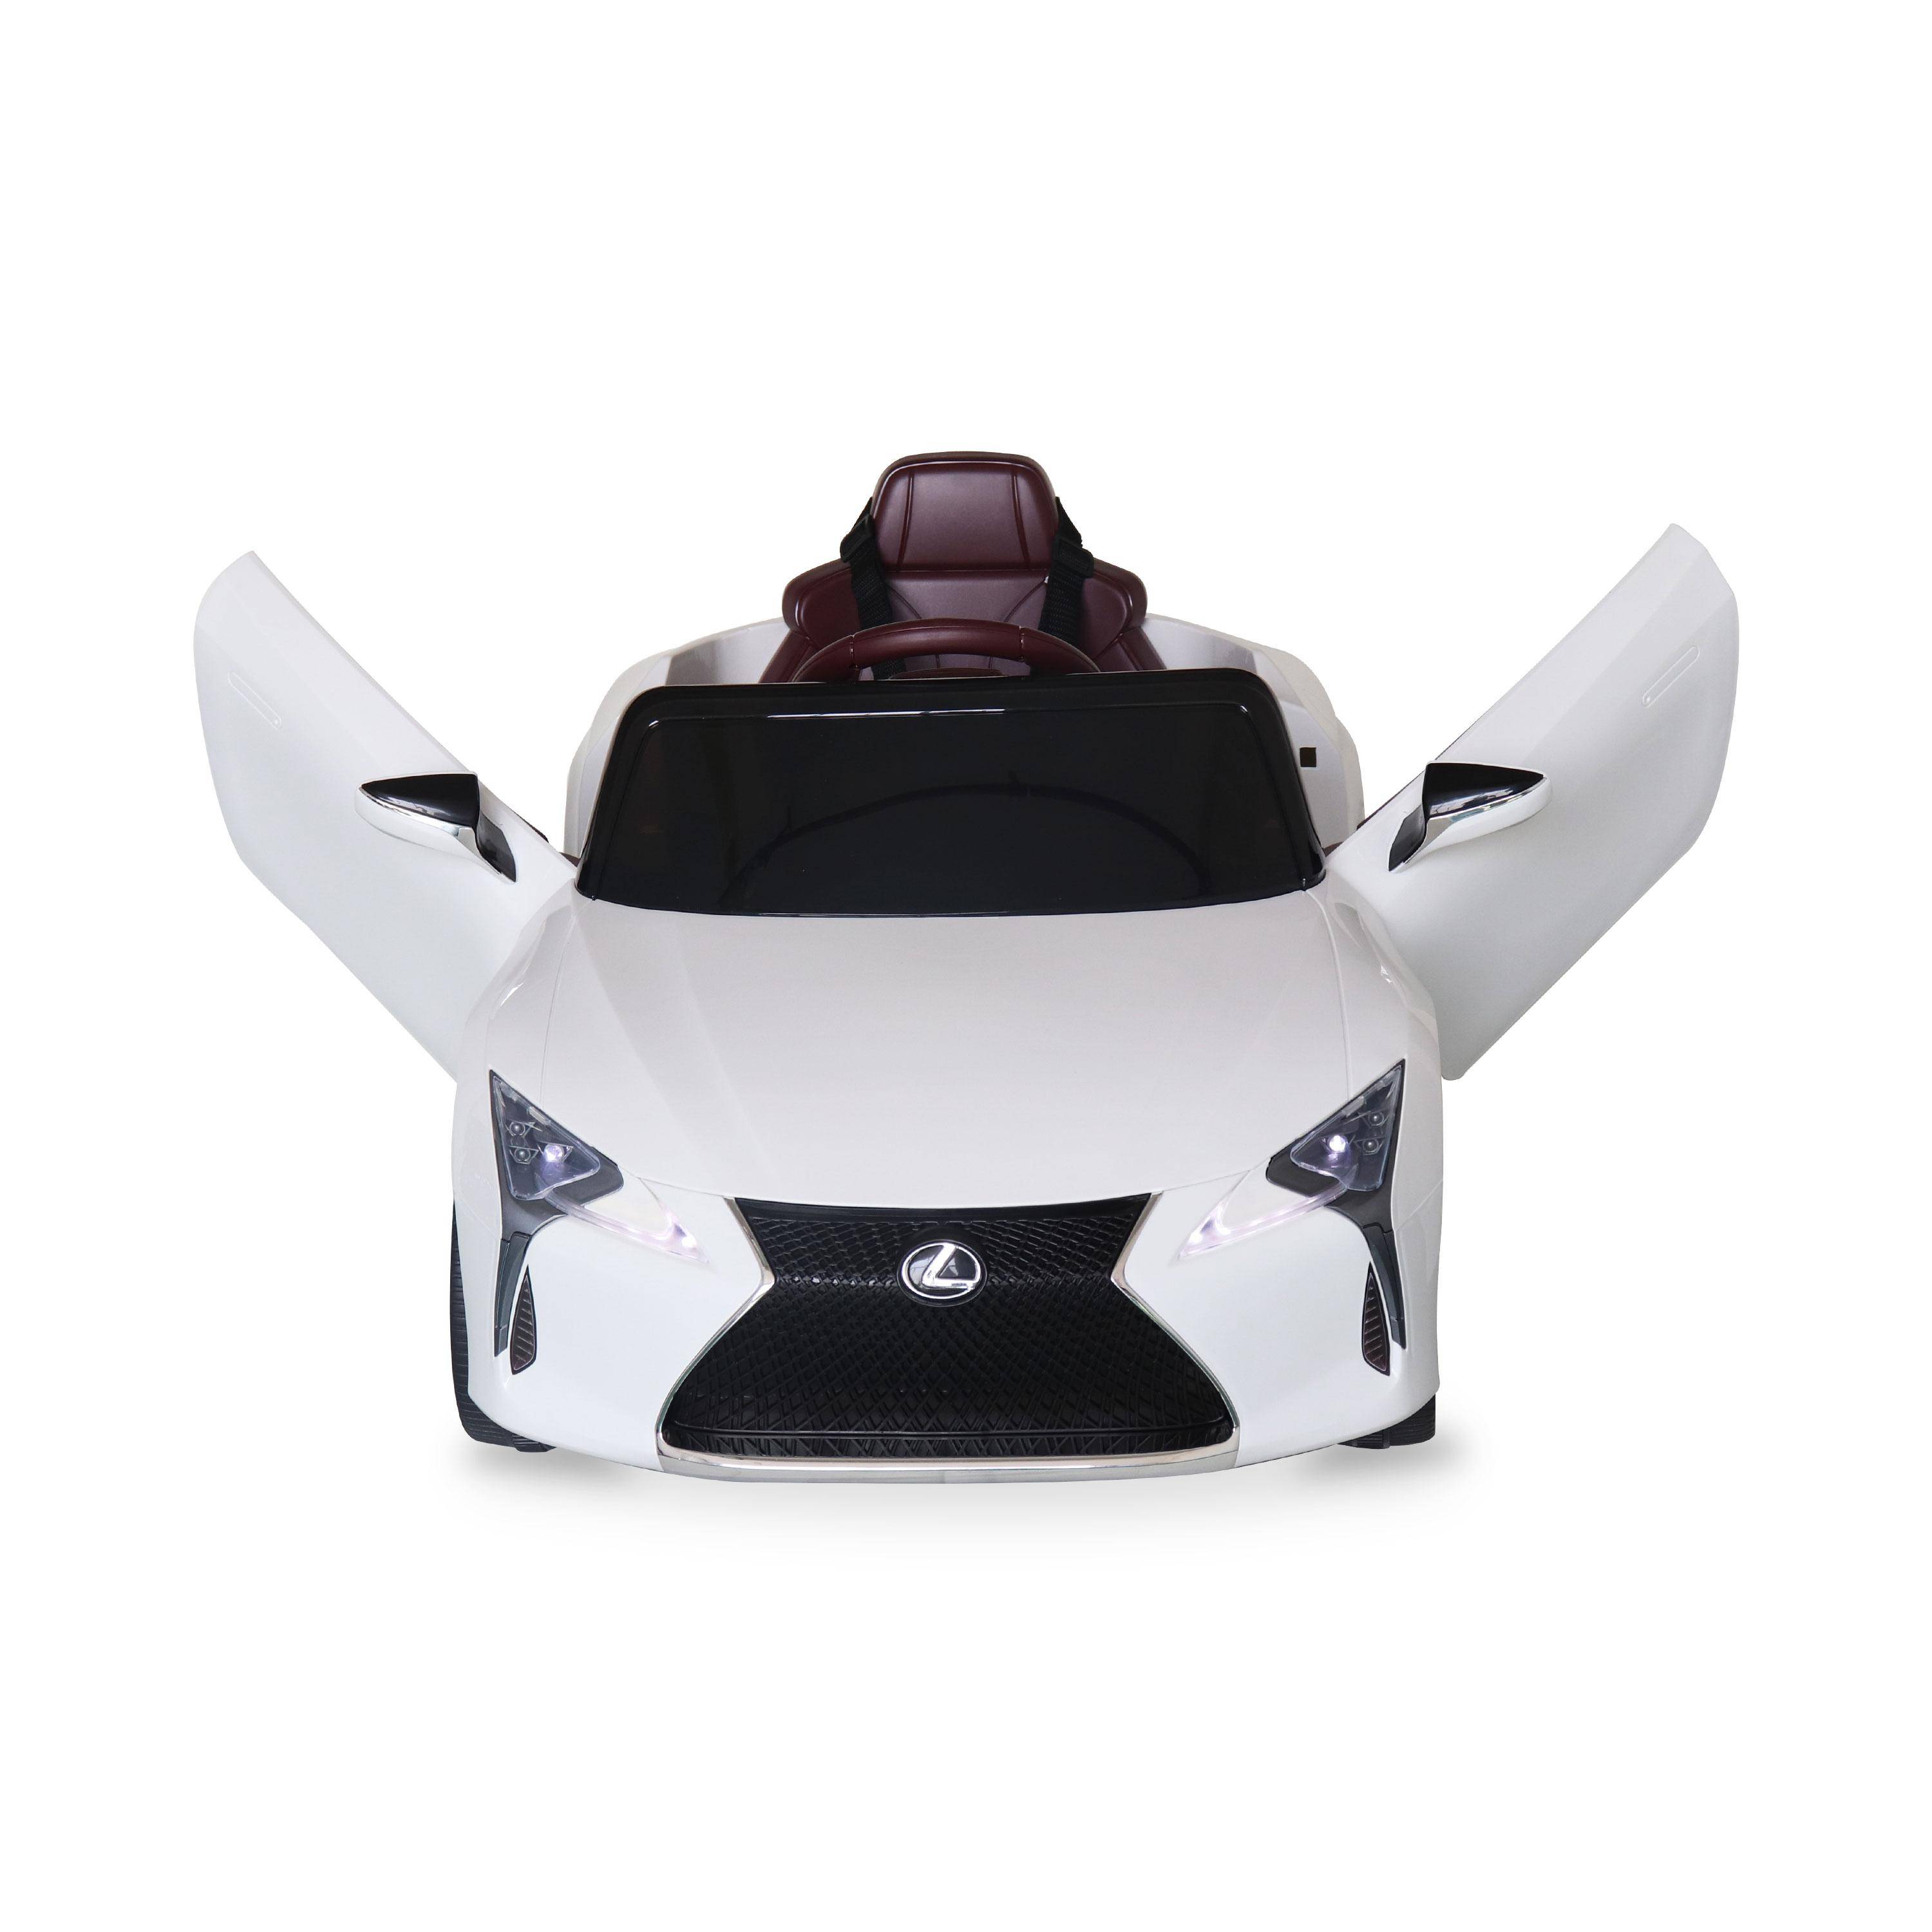 Children's electric car 12V, 1 seat, 4x4 with car radio and remote control - Lexus LC500 - White,sweeek,Photo3